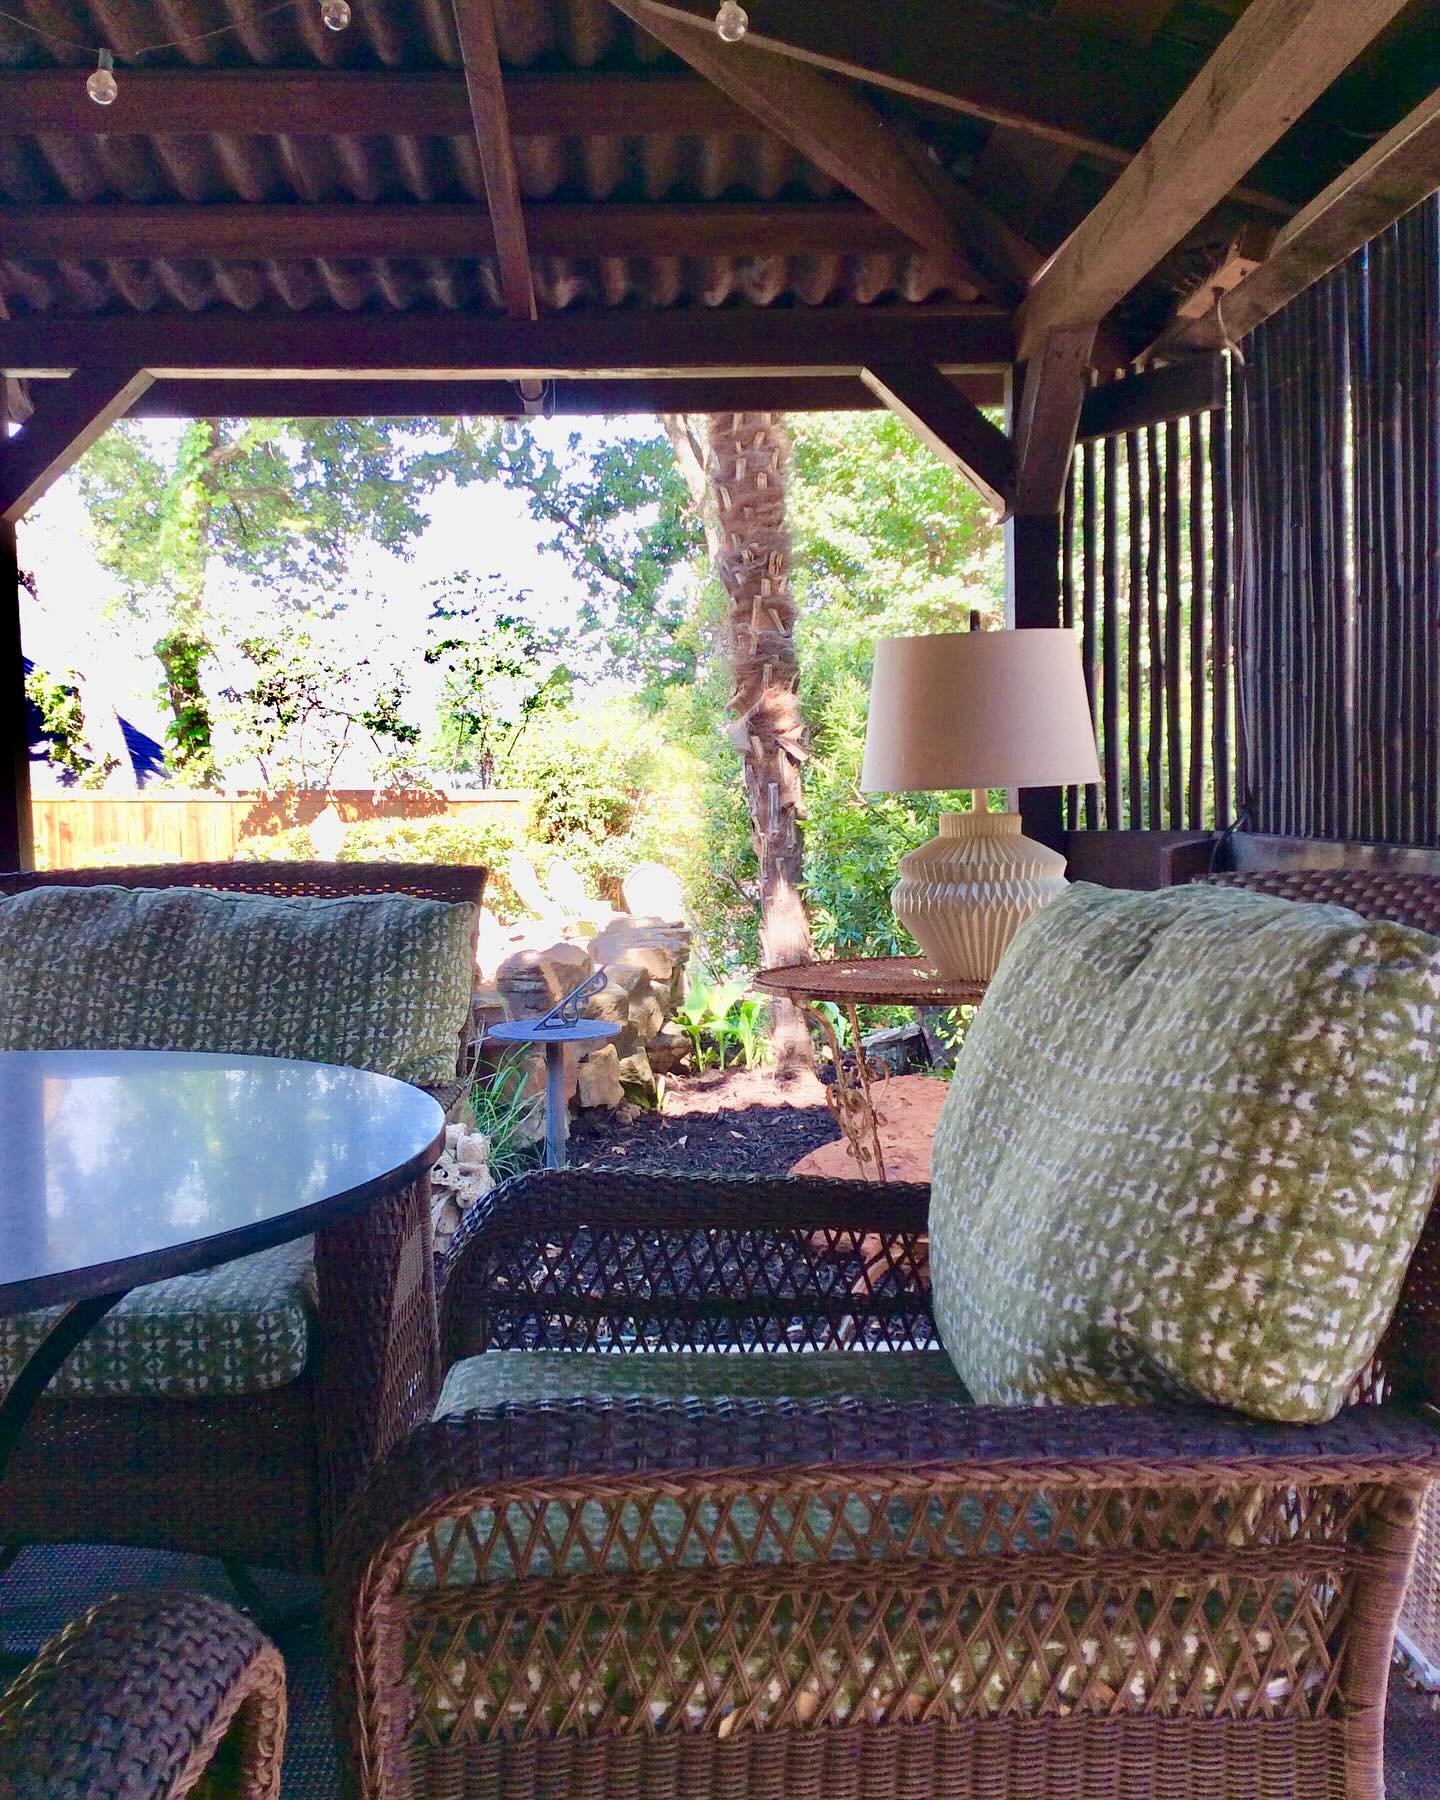 Enjoyed working outside today in our cabana. Gotta enjoy this weather while you can. Yes, I have a lamp outside and love how it looks and feels at night ❤️#revolutionfabrics #revolutionperformancefabric #greatoutdoors #outdoorspaces #performacefabric